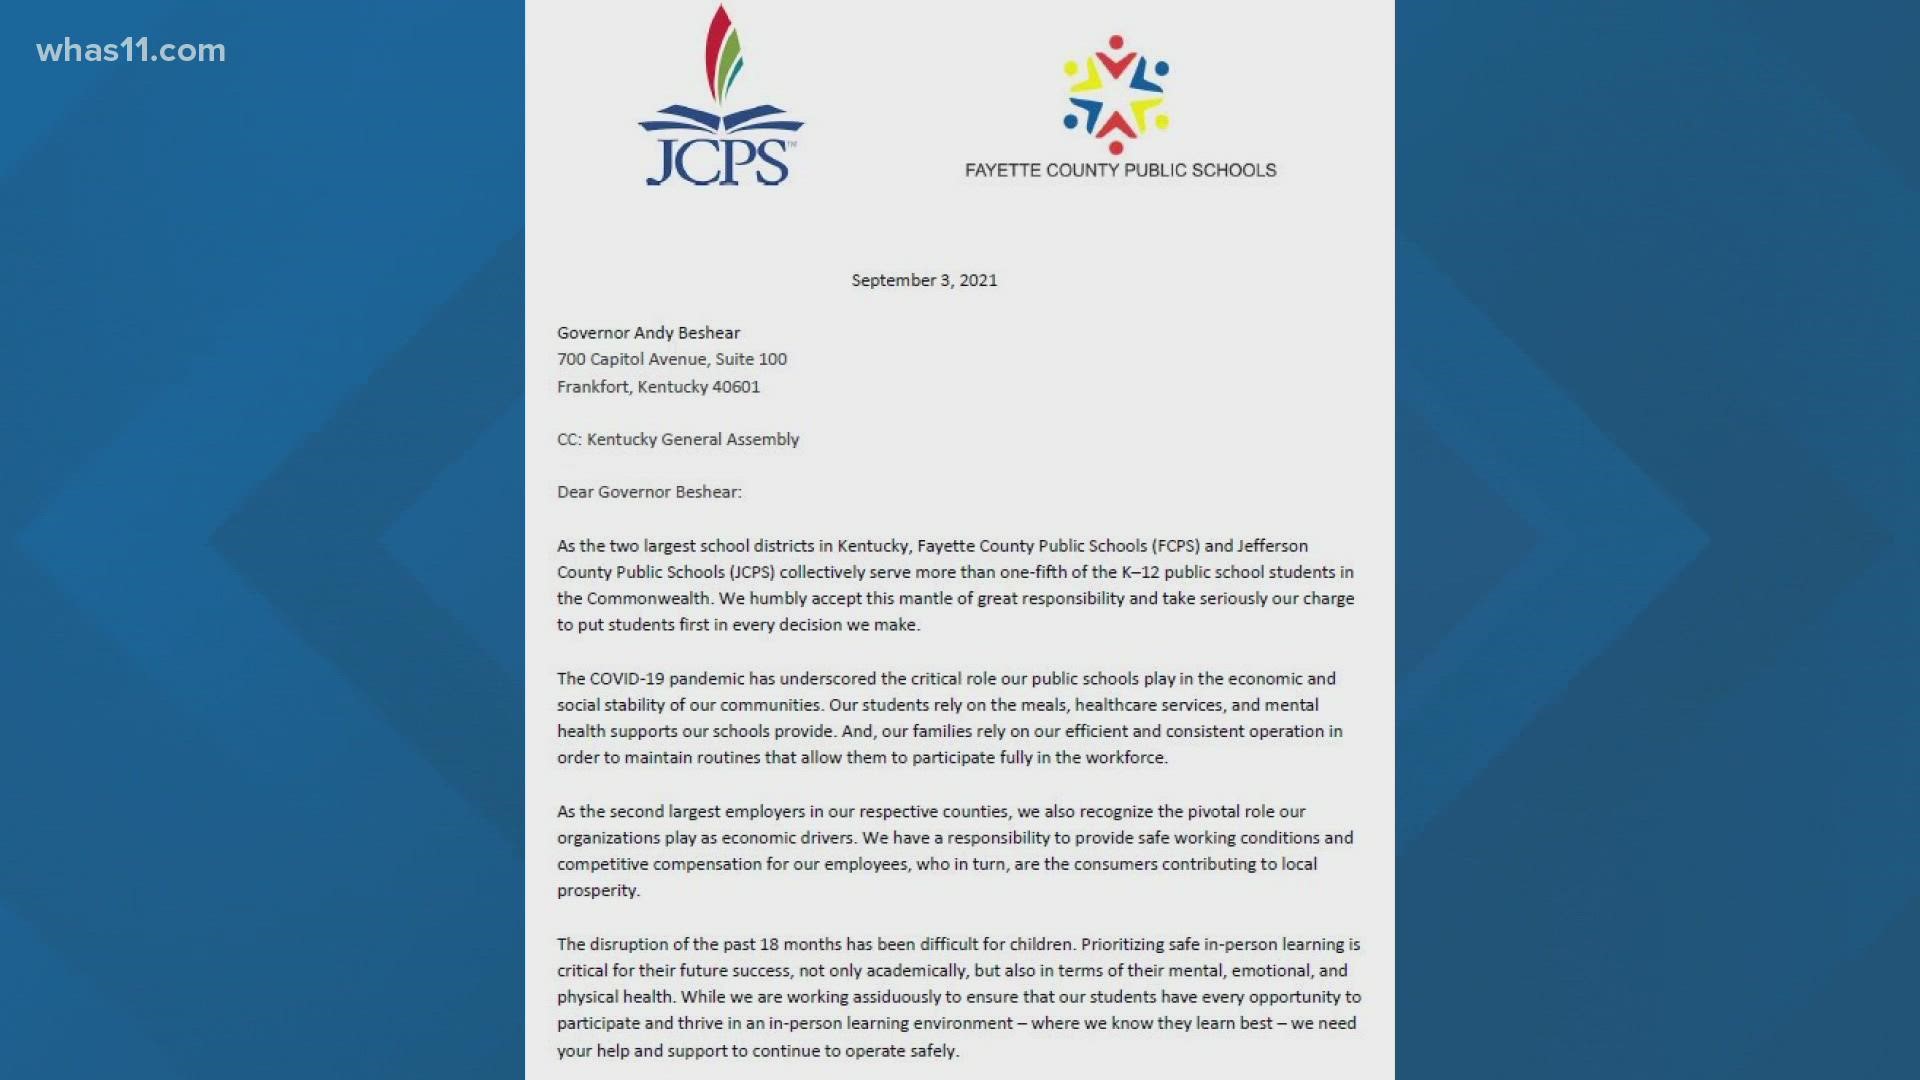 The superintendents of Jefferson and Fayette County Public Schools are asking Governor Beshear and the General Assembly for help.